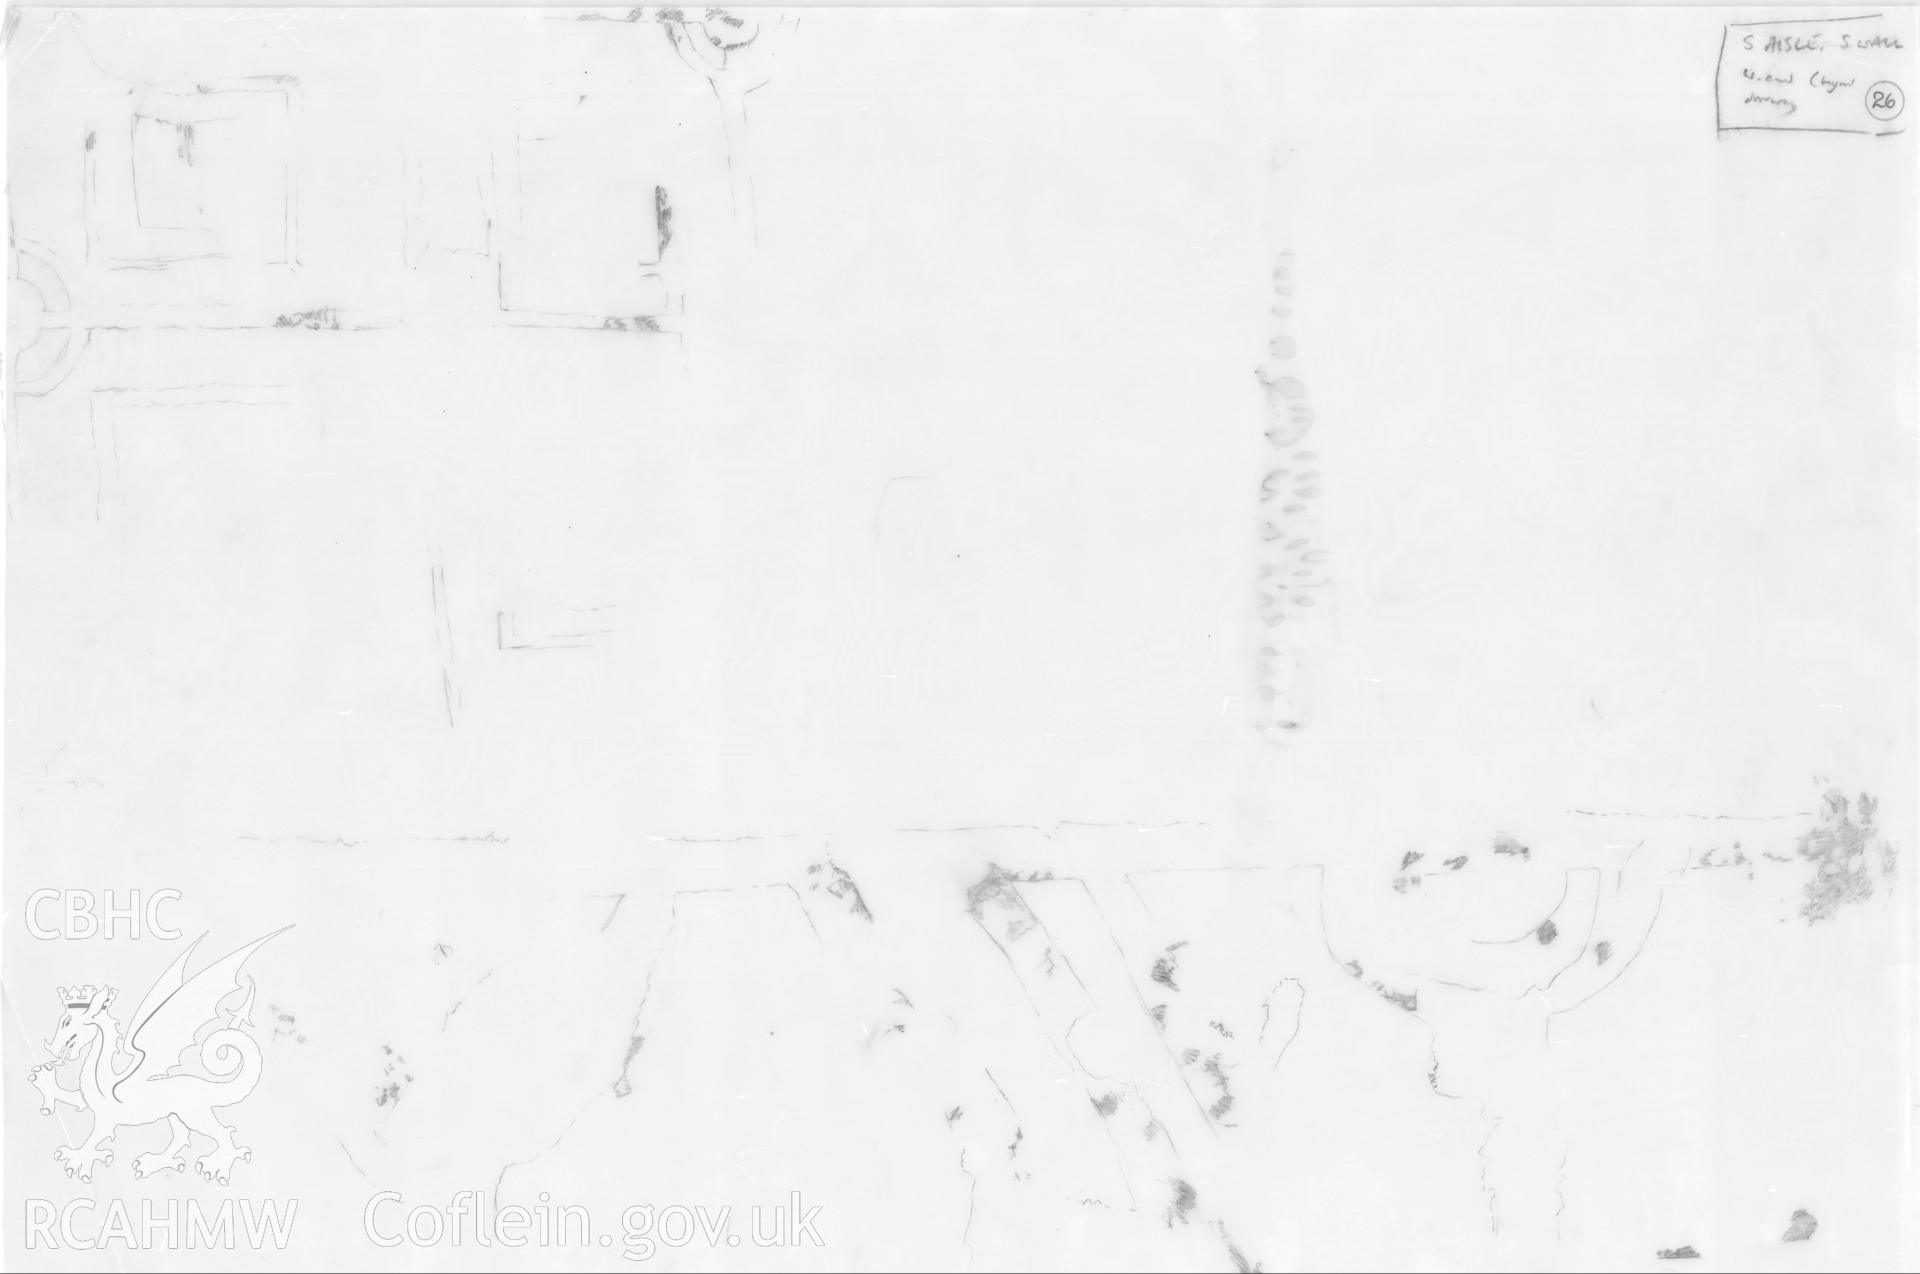 Provisional sketch on tracing paper showing the wall painting on the west end of the south wall of the south aisle in St Teilo's Church, Llandeilo Talybont, produced by A.J. Parkinson, undated.